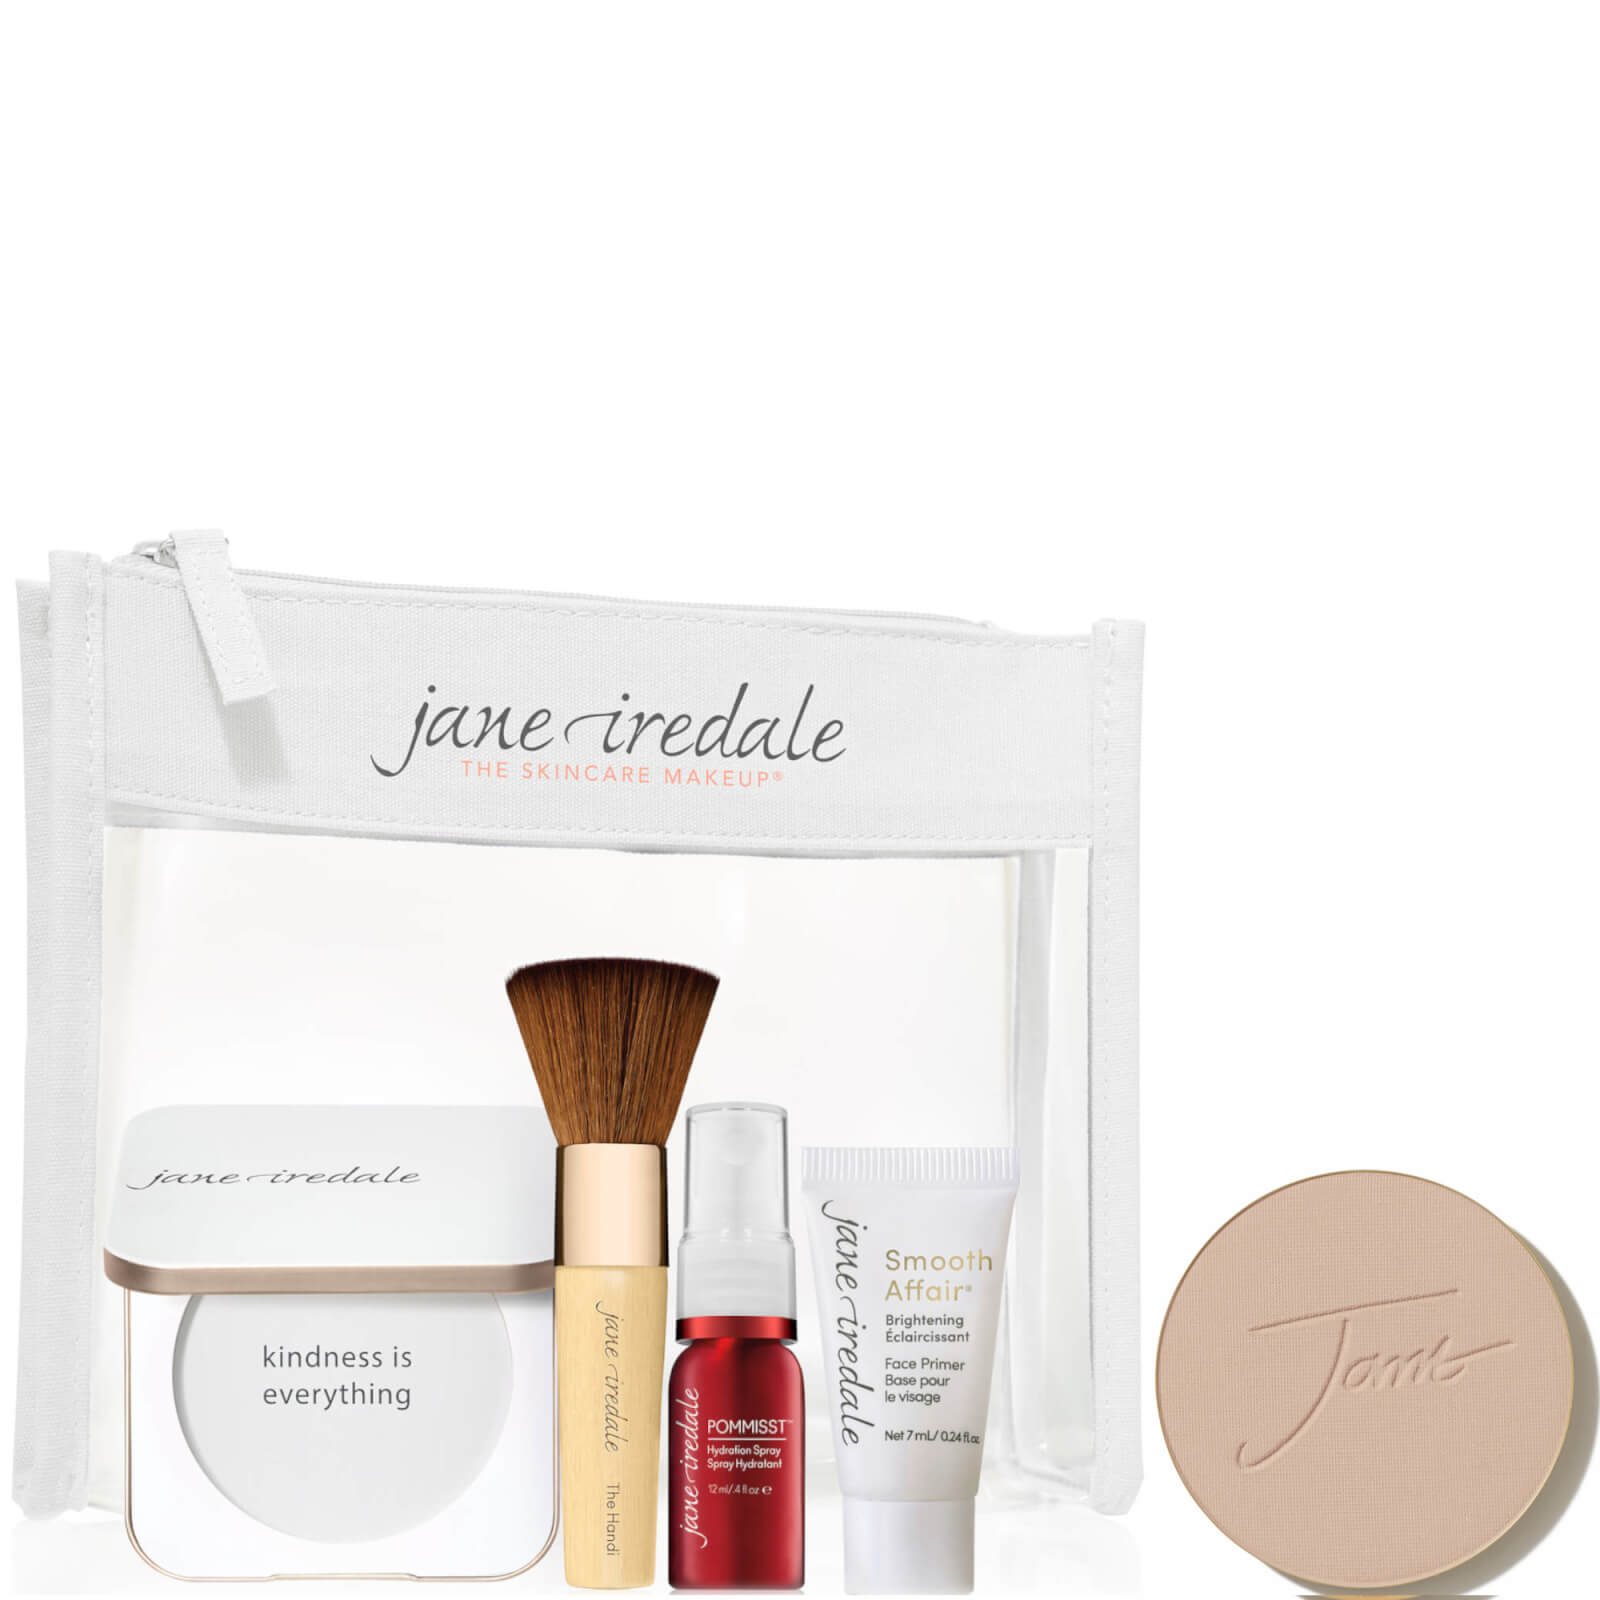 Jane Iredale The Skincare Makeup System Essentials And Purepressed Mineral Foundation Bundle (various Shades) (wo In Honey Bronze